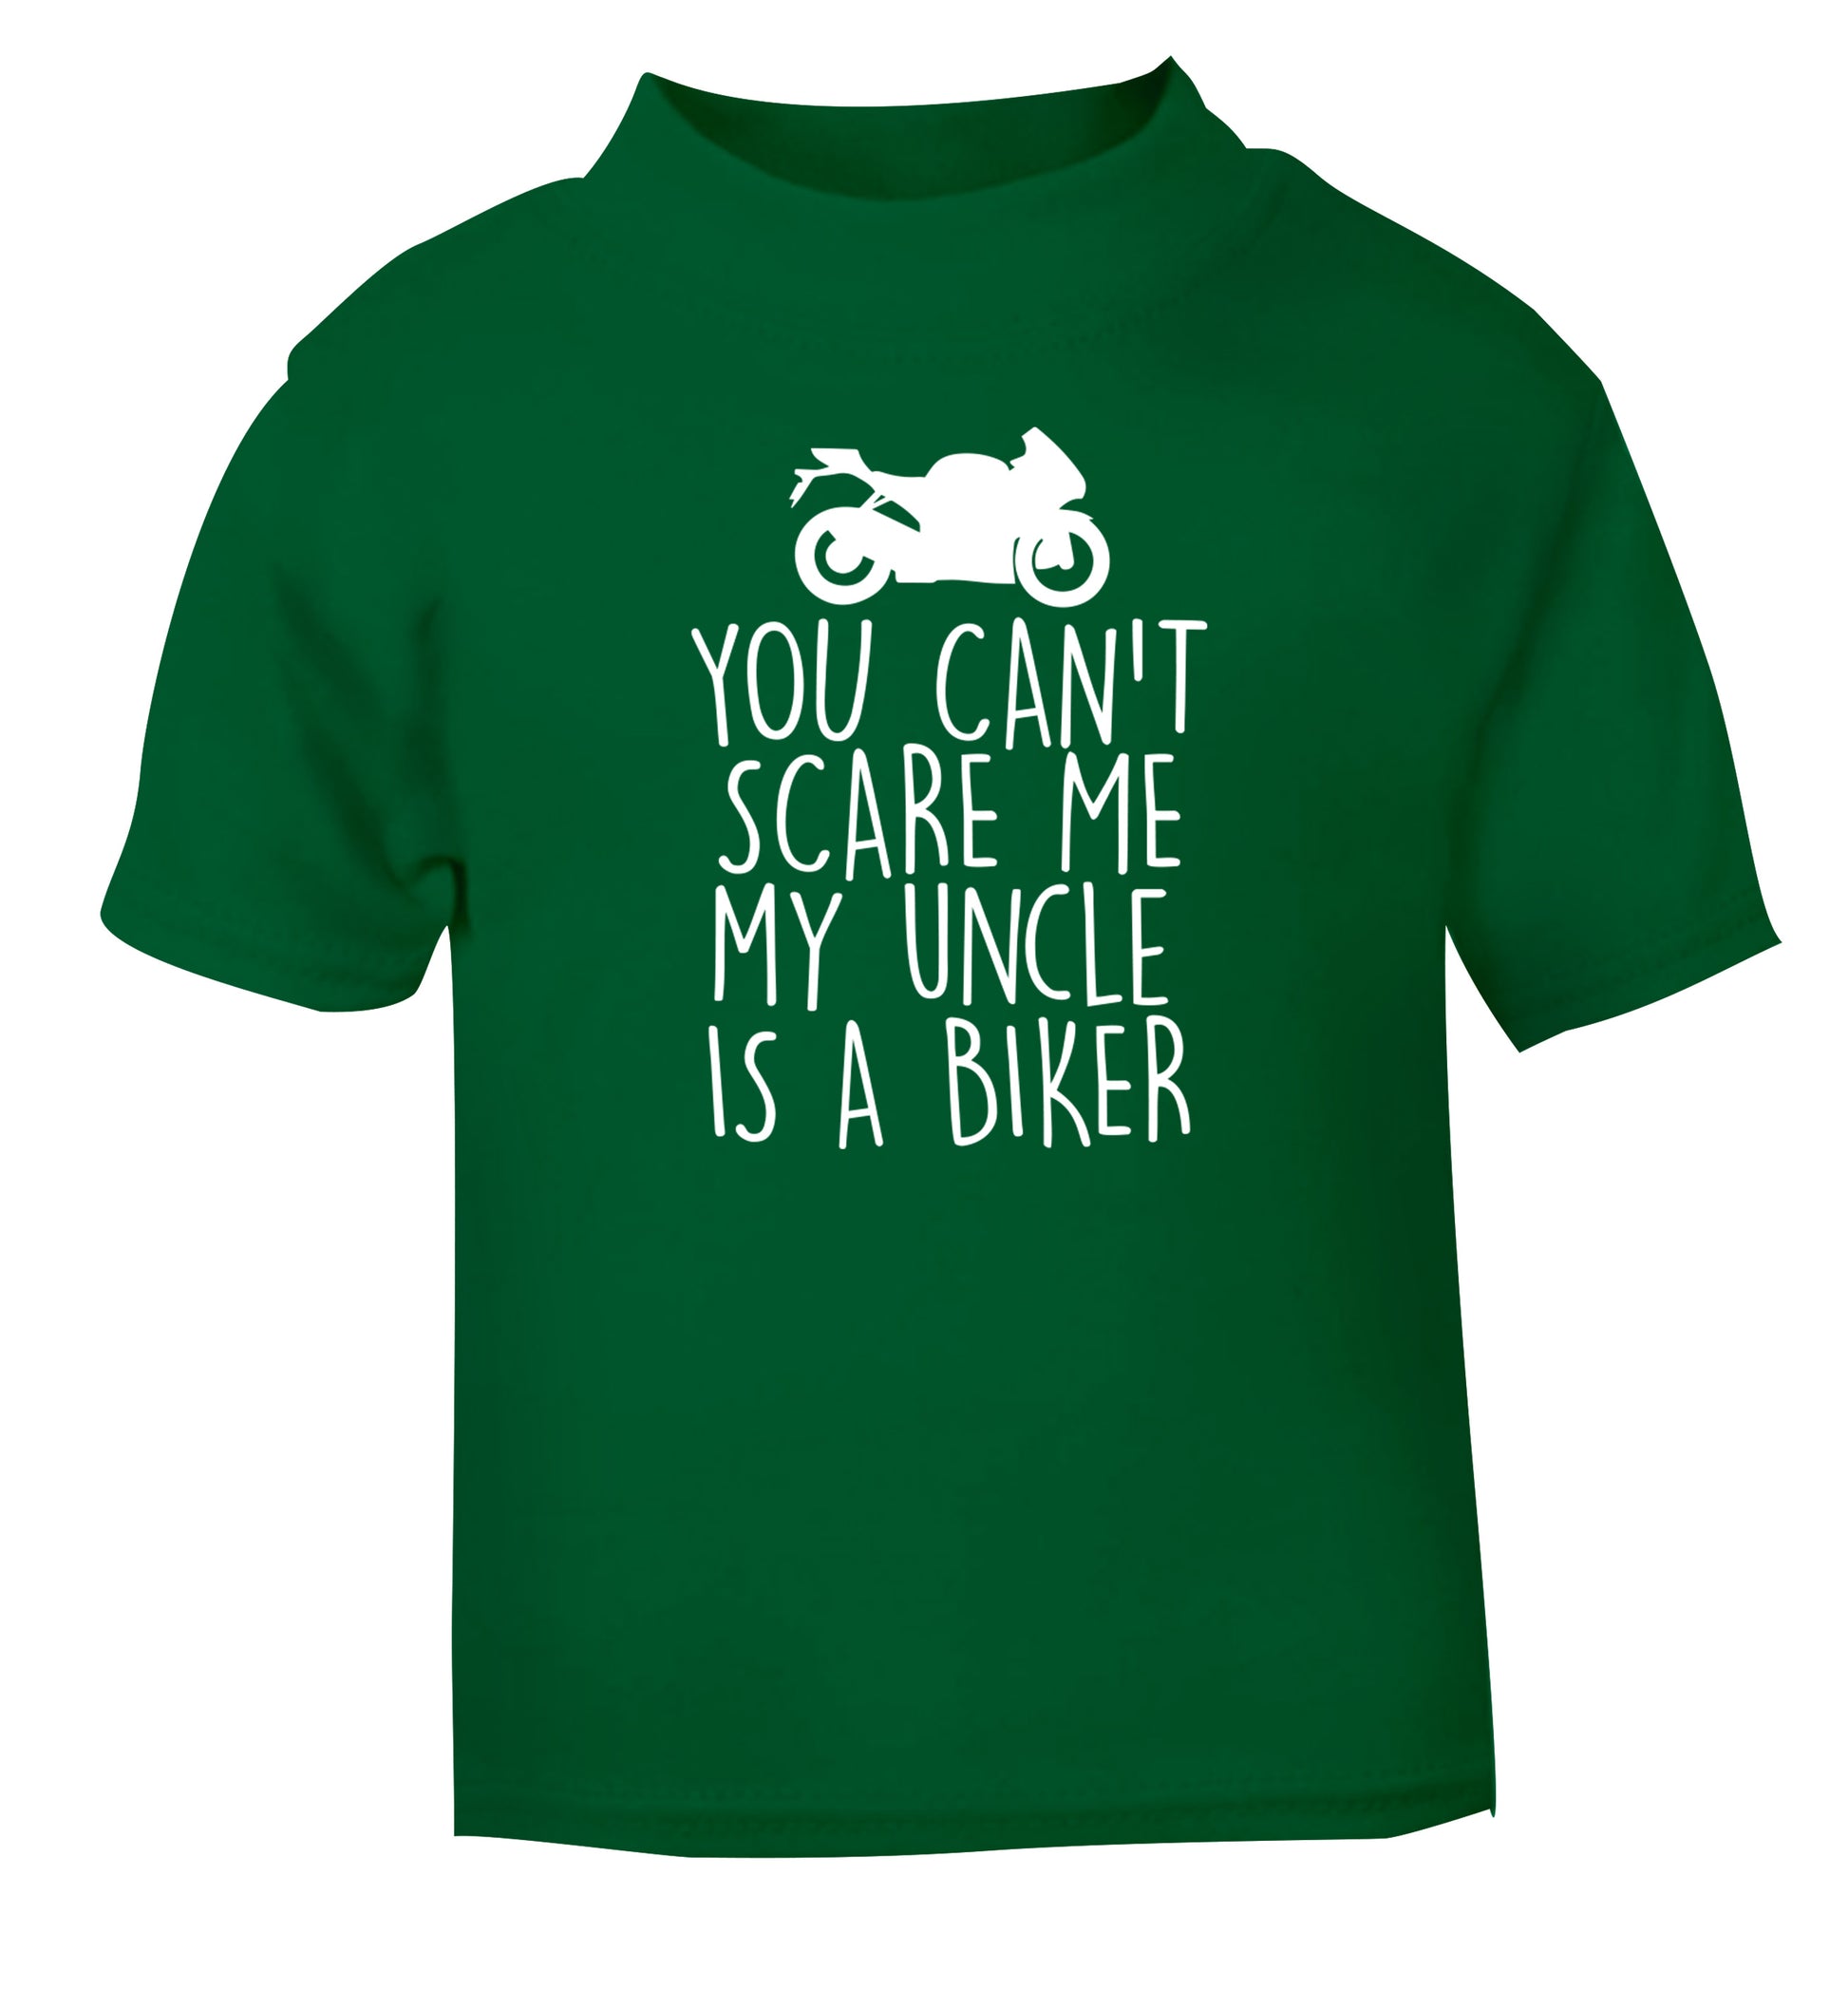 You can't scare me my uncle is a biker green Baby Toddler Tshirt 2 Years